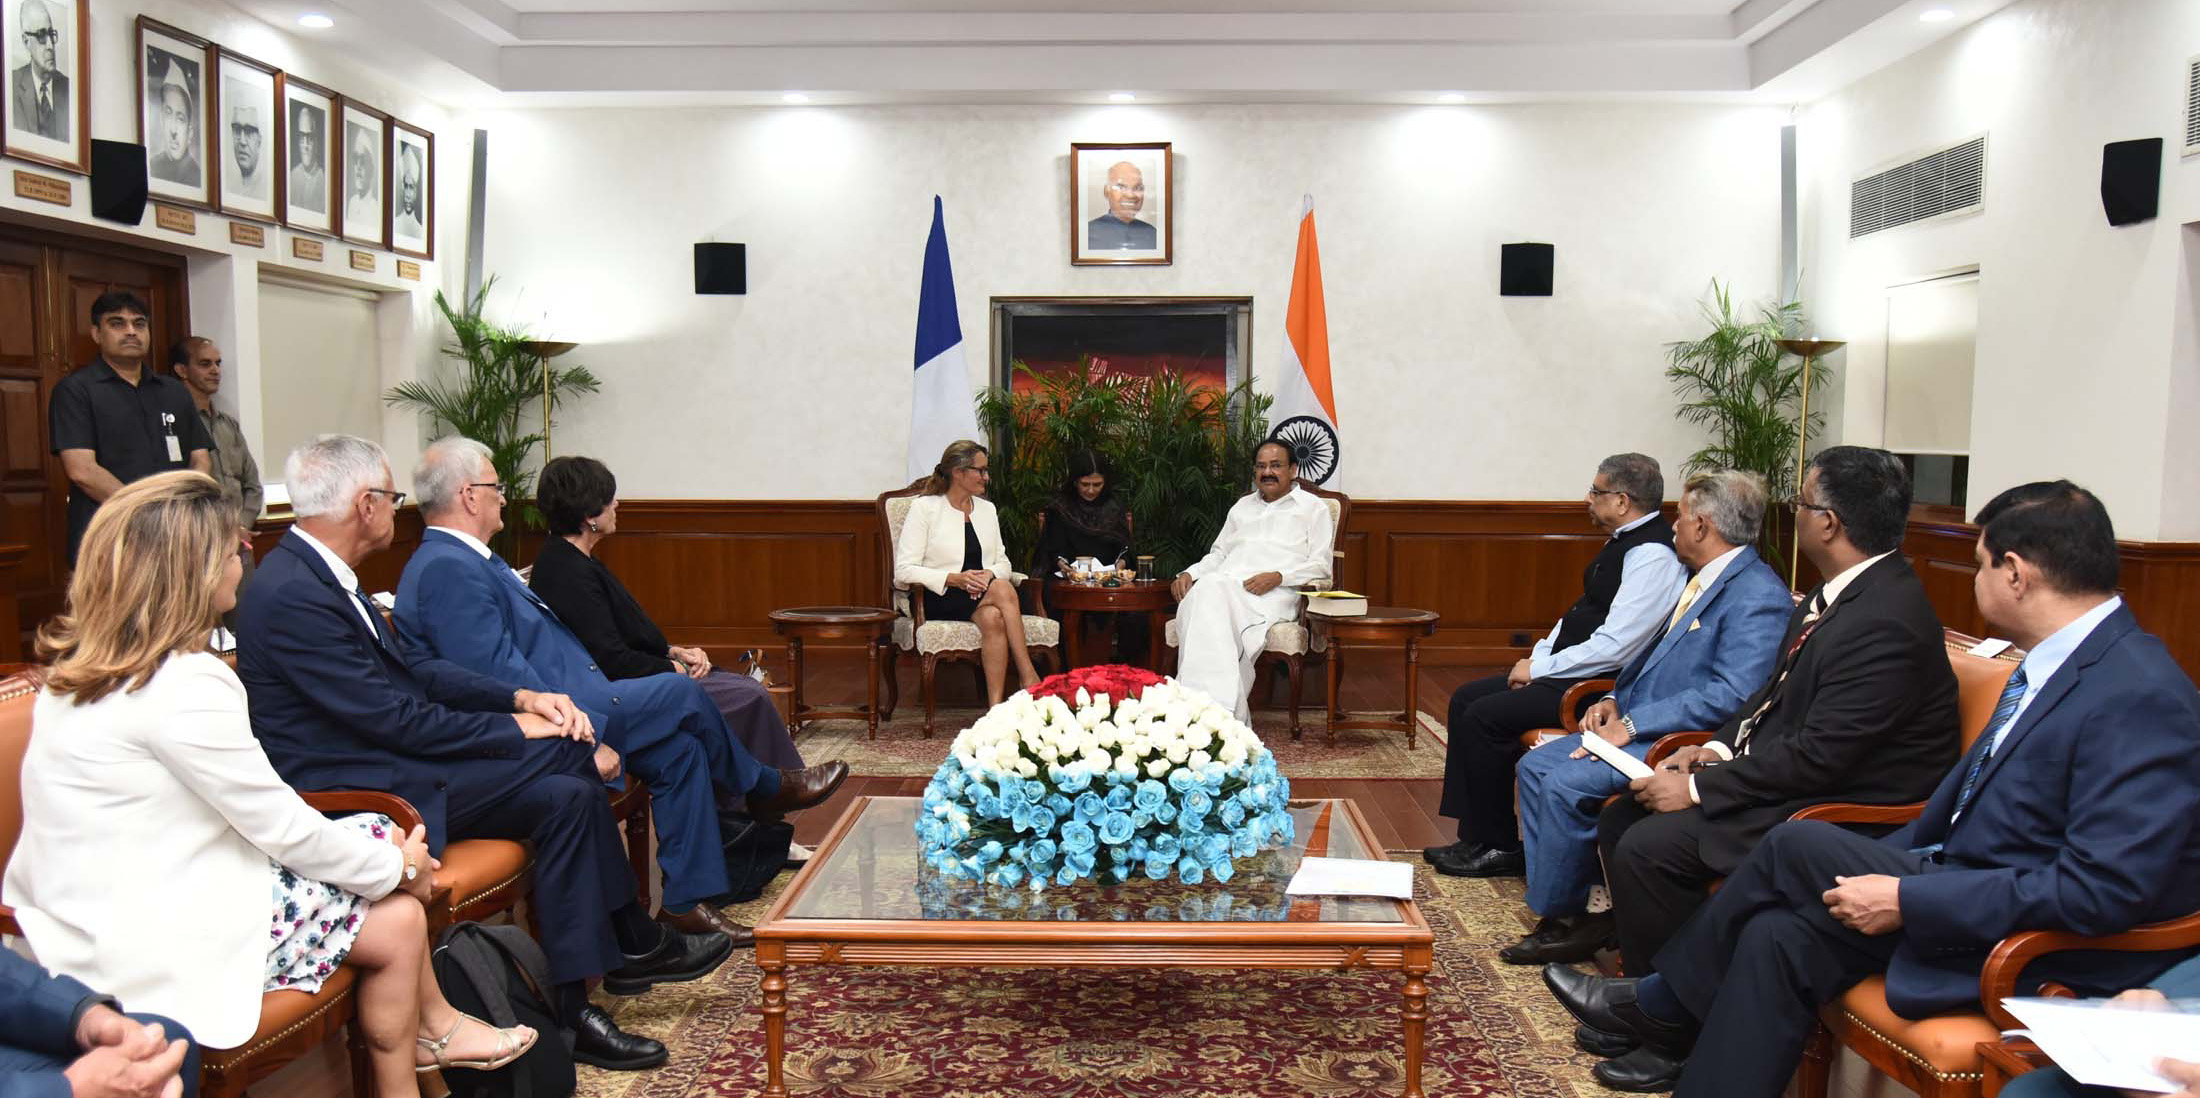 A delegation of French Parliamentarians led by the Chair, Senate Standing Committee for Economic Affairs, France, . Sophie Primas calling on the Vice President,  M. Venkaiah Naidu, in New Delhi on September 09, 2019.